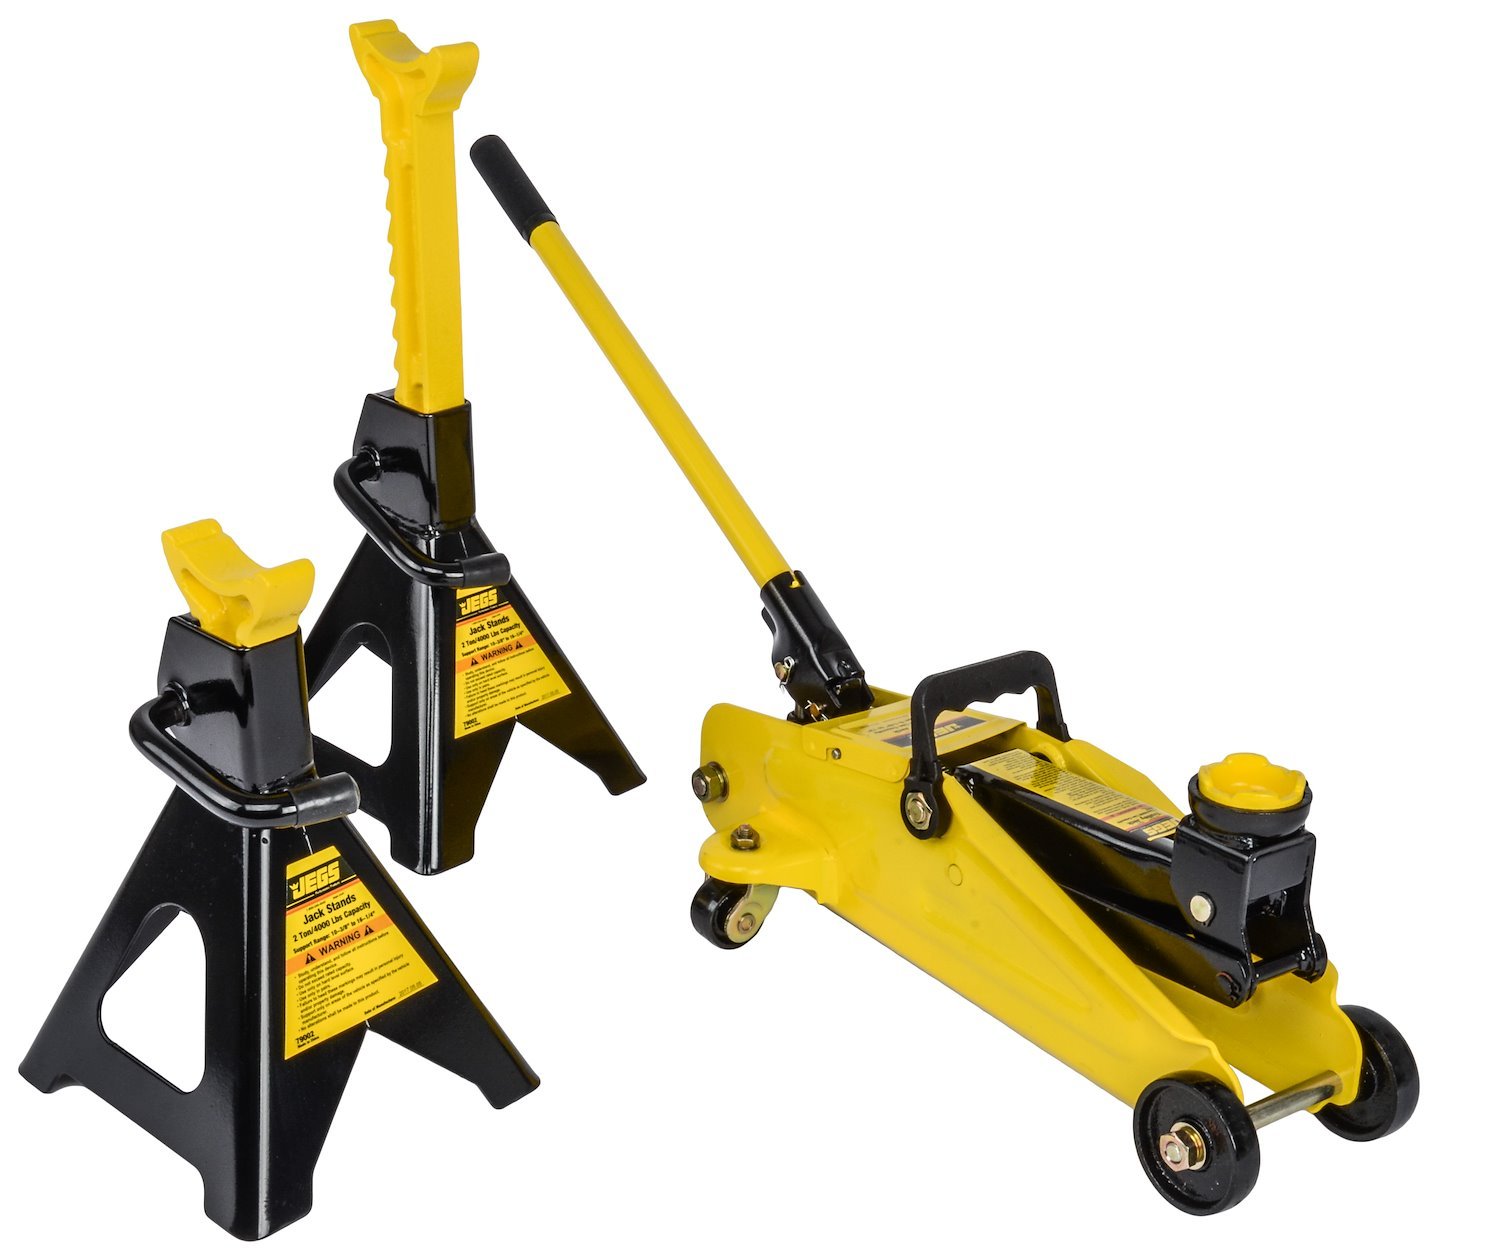 Hydraulic Utility Floor Jack and Jack Stands [2-Ton Capacity]